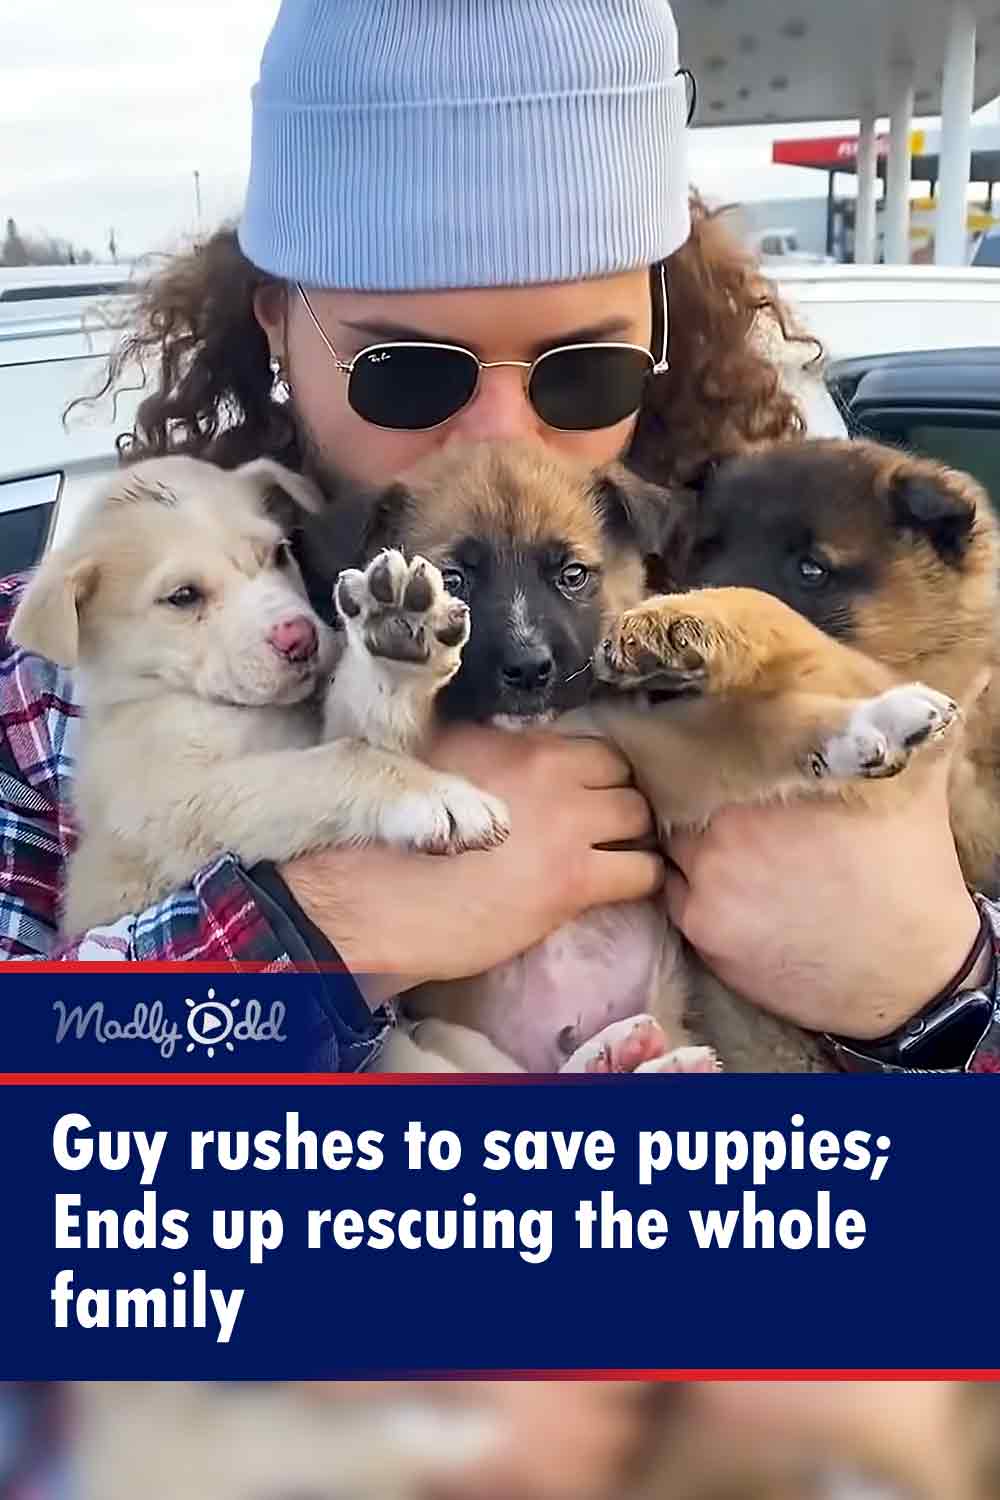 Guy rushes to save puppies; Ends up rescuing the whole family